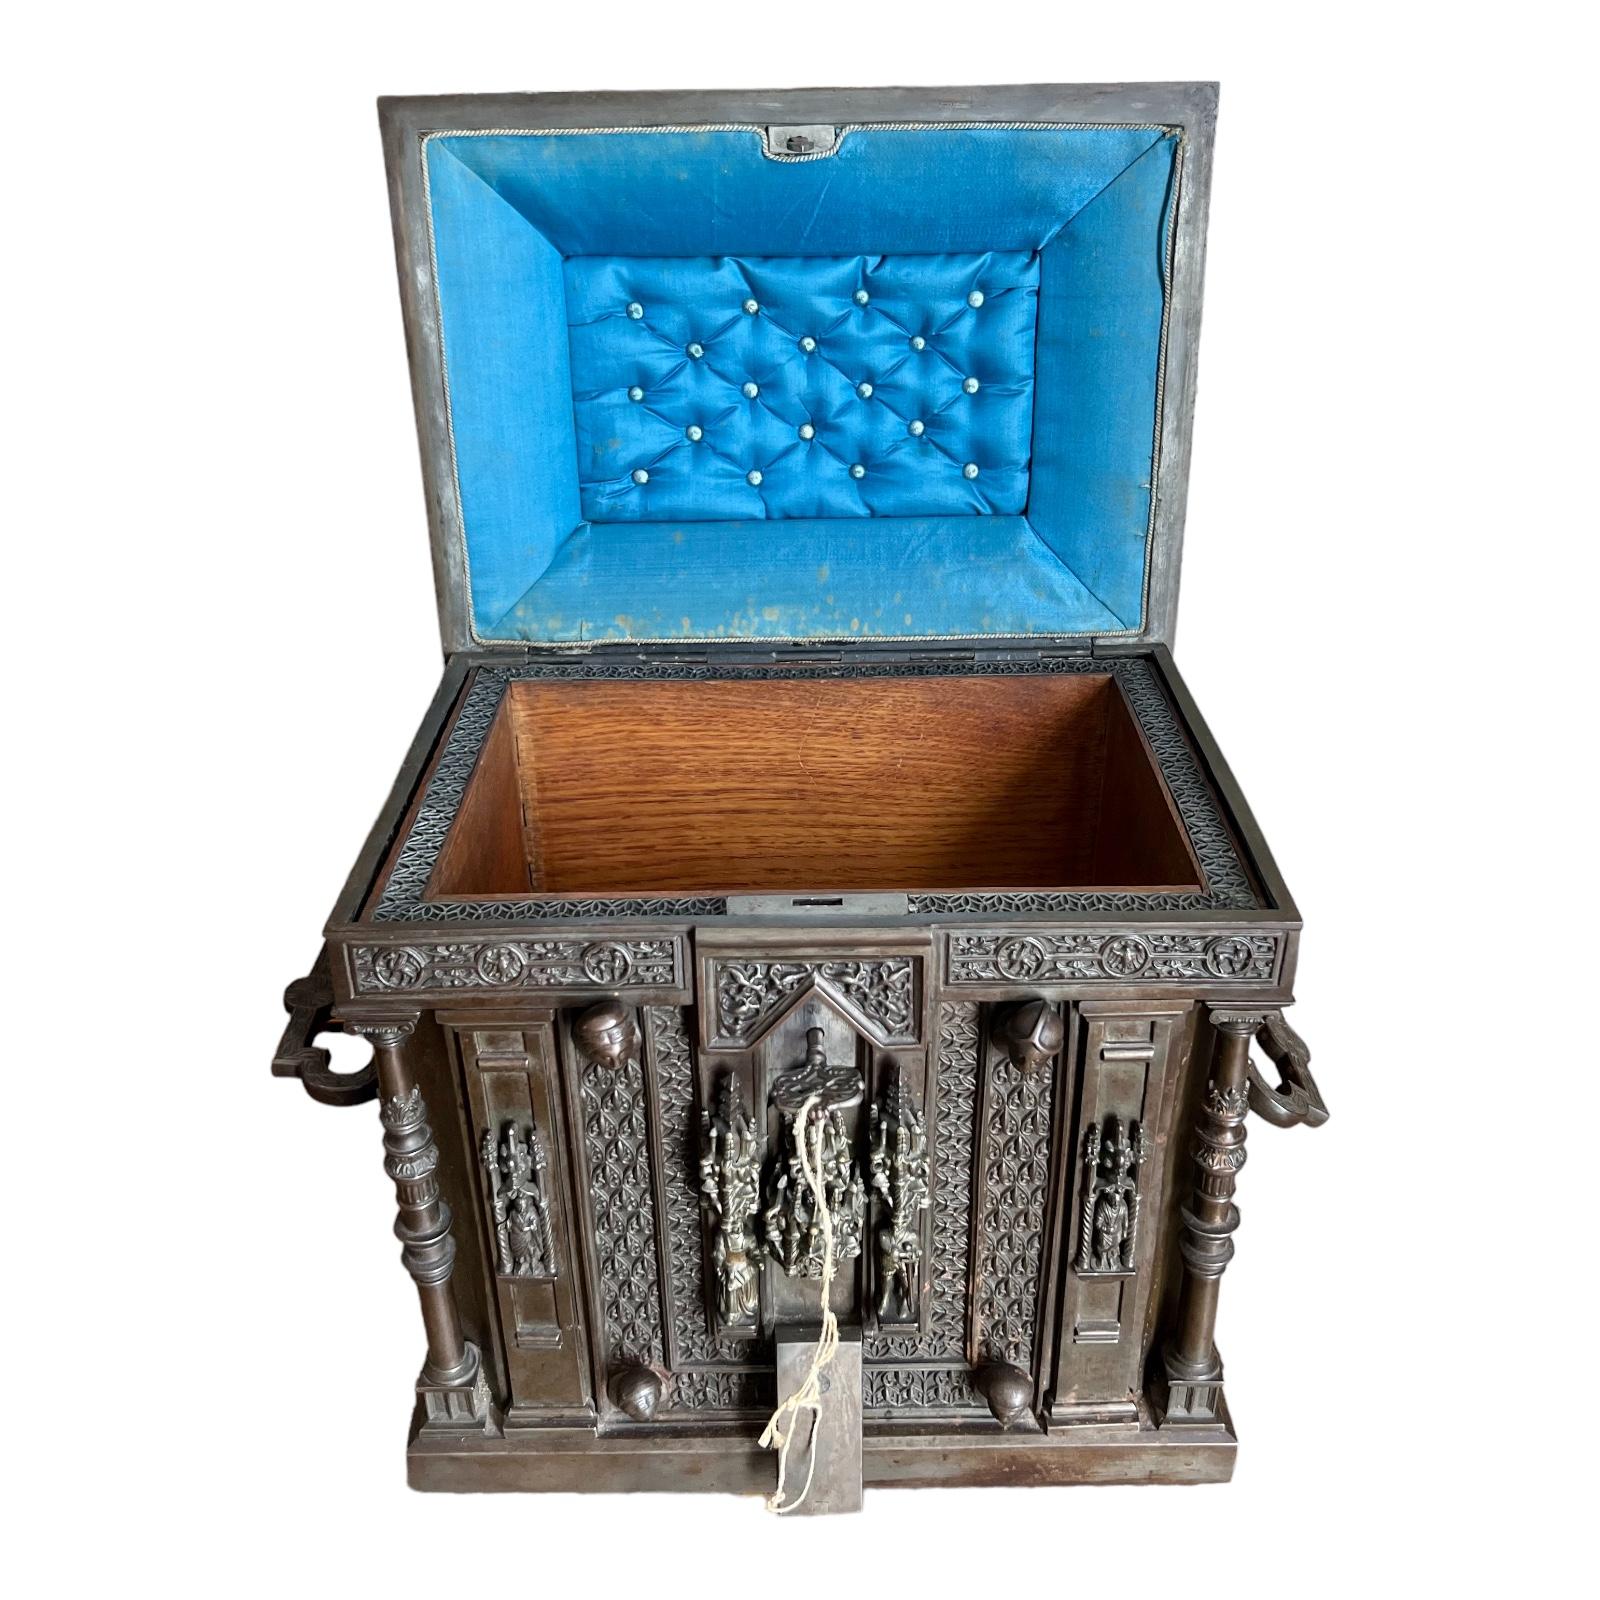 Gothic Revival Bronze Jewelry Chest In Neo-gothic Style From The Napoleon III Period For Sale